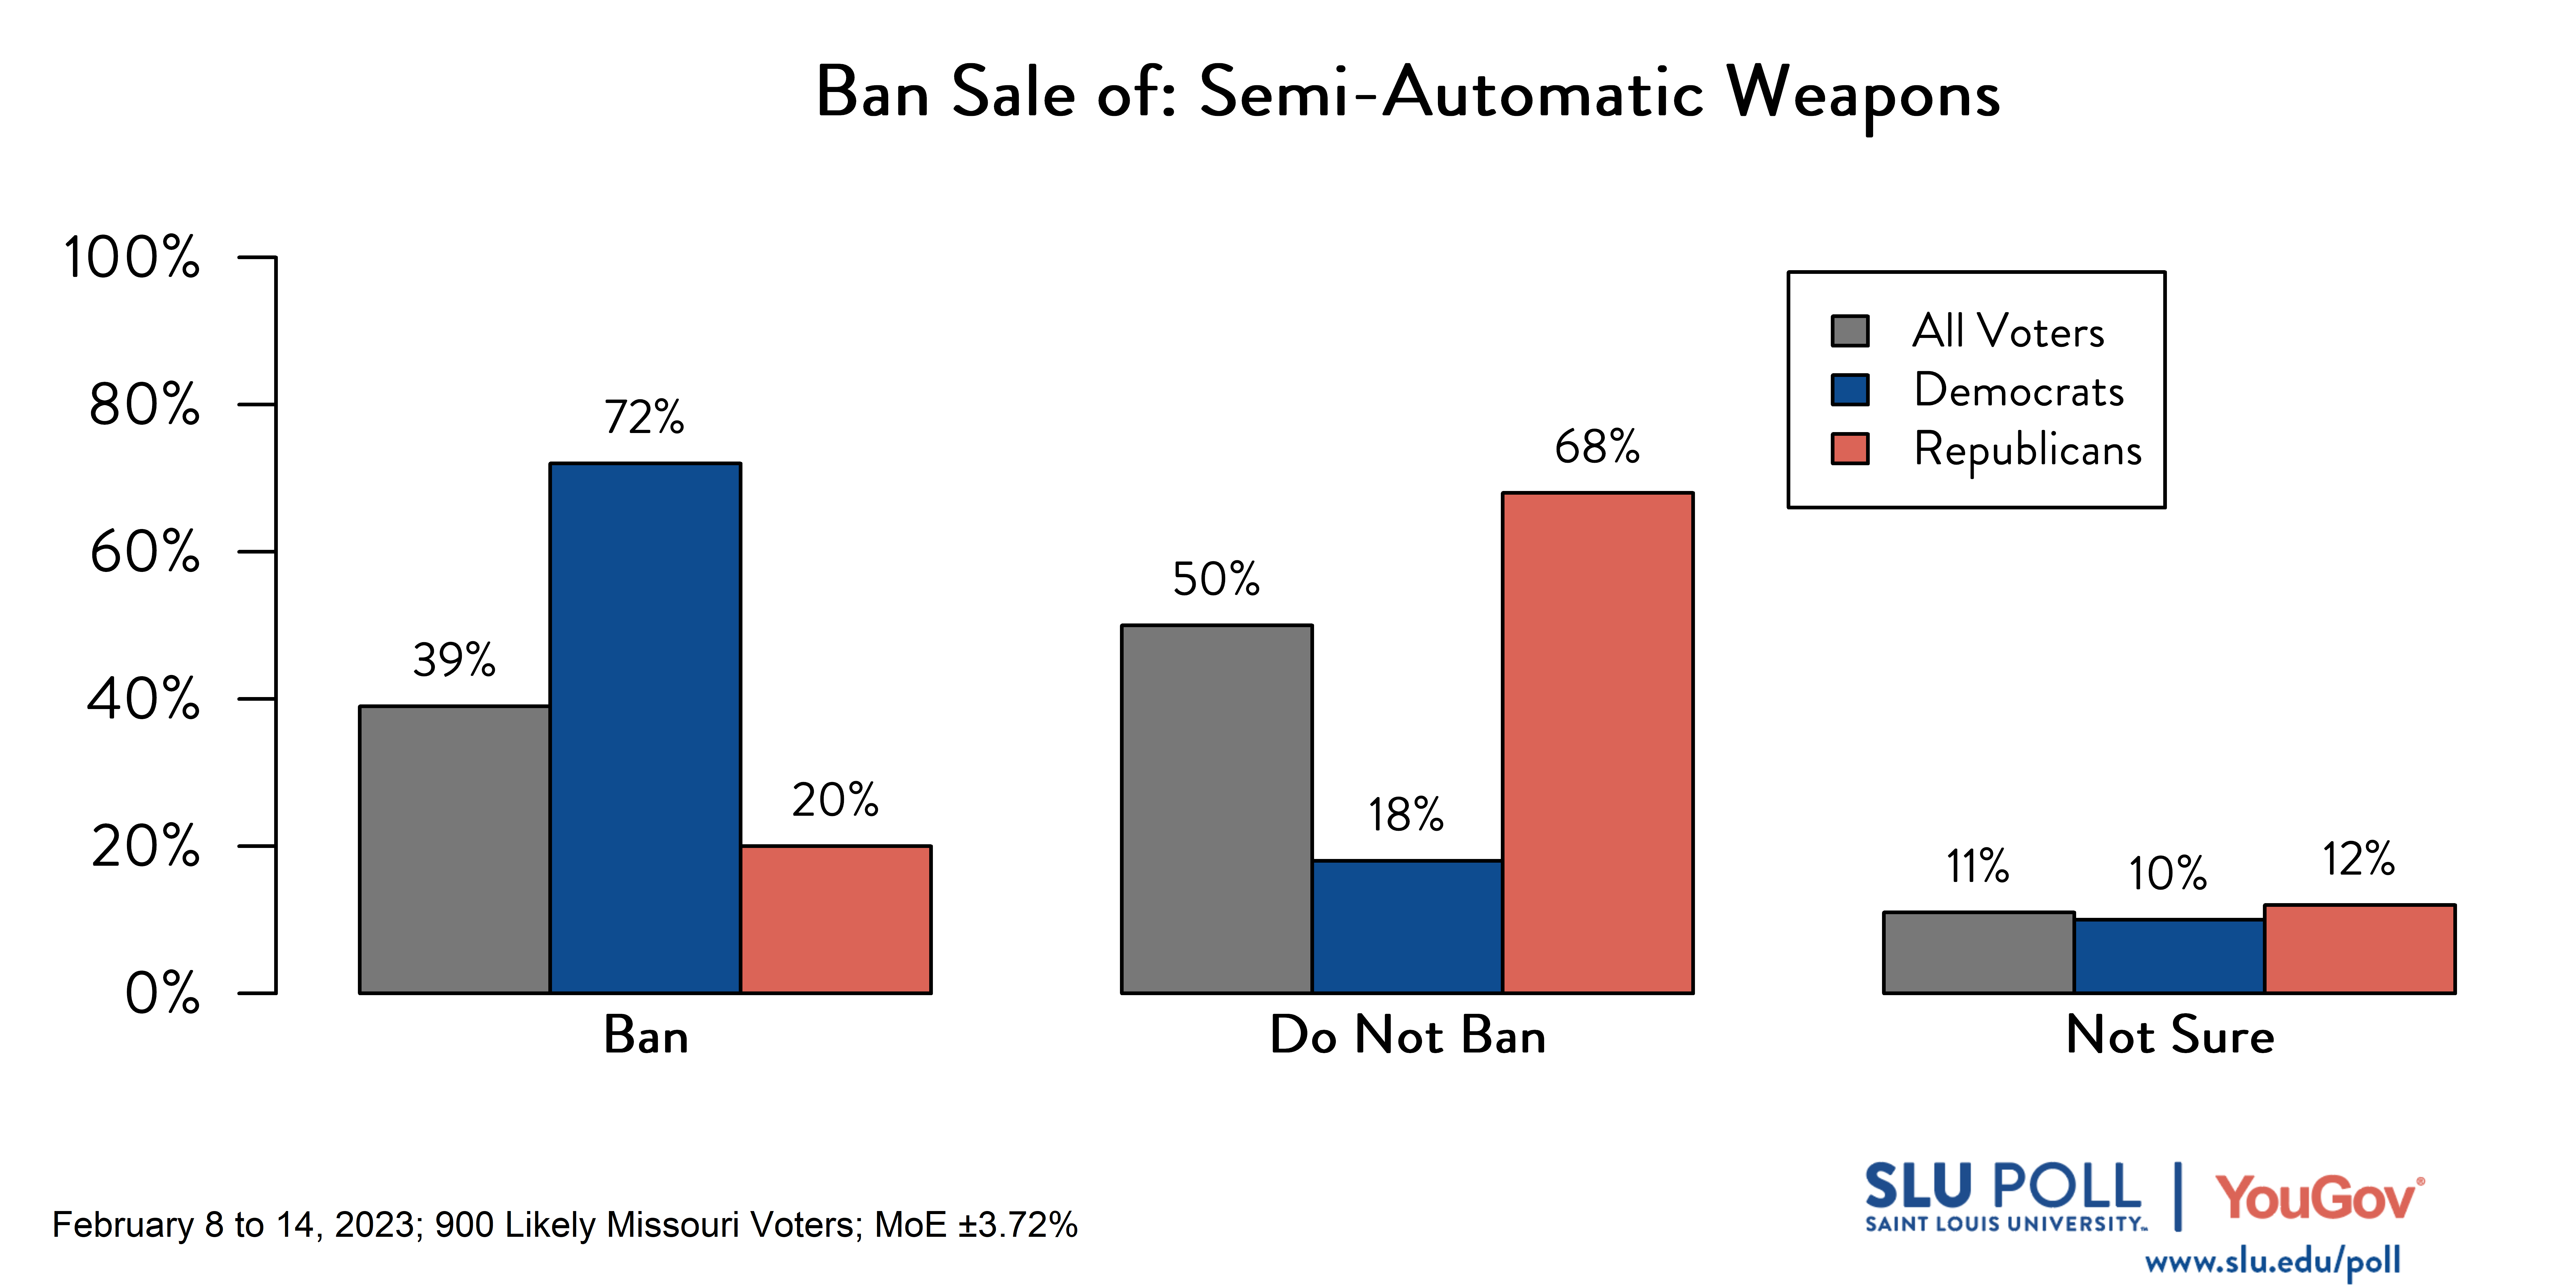 Likely voters' responses to 'Do you support banning the following gun-related sales, except those that are issued to law enforcement officers: The sale of semi-automatic weapons? ': 39% Ban, 50% Do not ban, and 11% Not sure. Democratic voters' responses: ' 72% Ban, 18% Do not ban, and 10% Not sure. Republican voters' responses: 20% Ban, 68% Do not ban, and 12% Not sure.